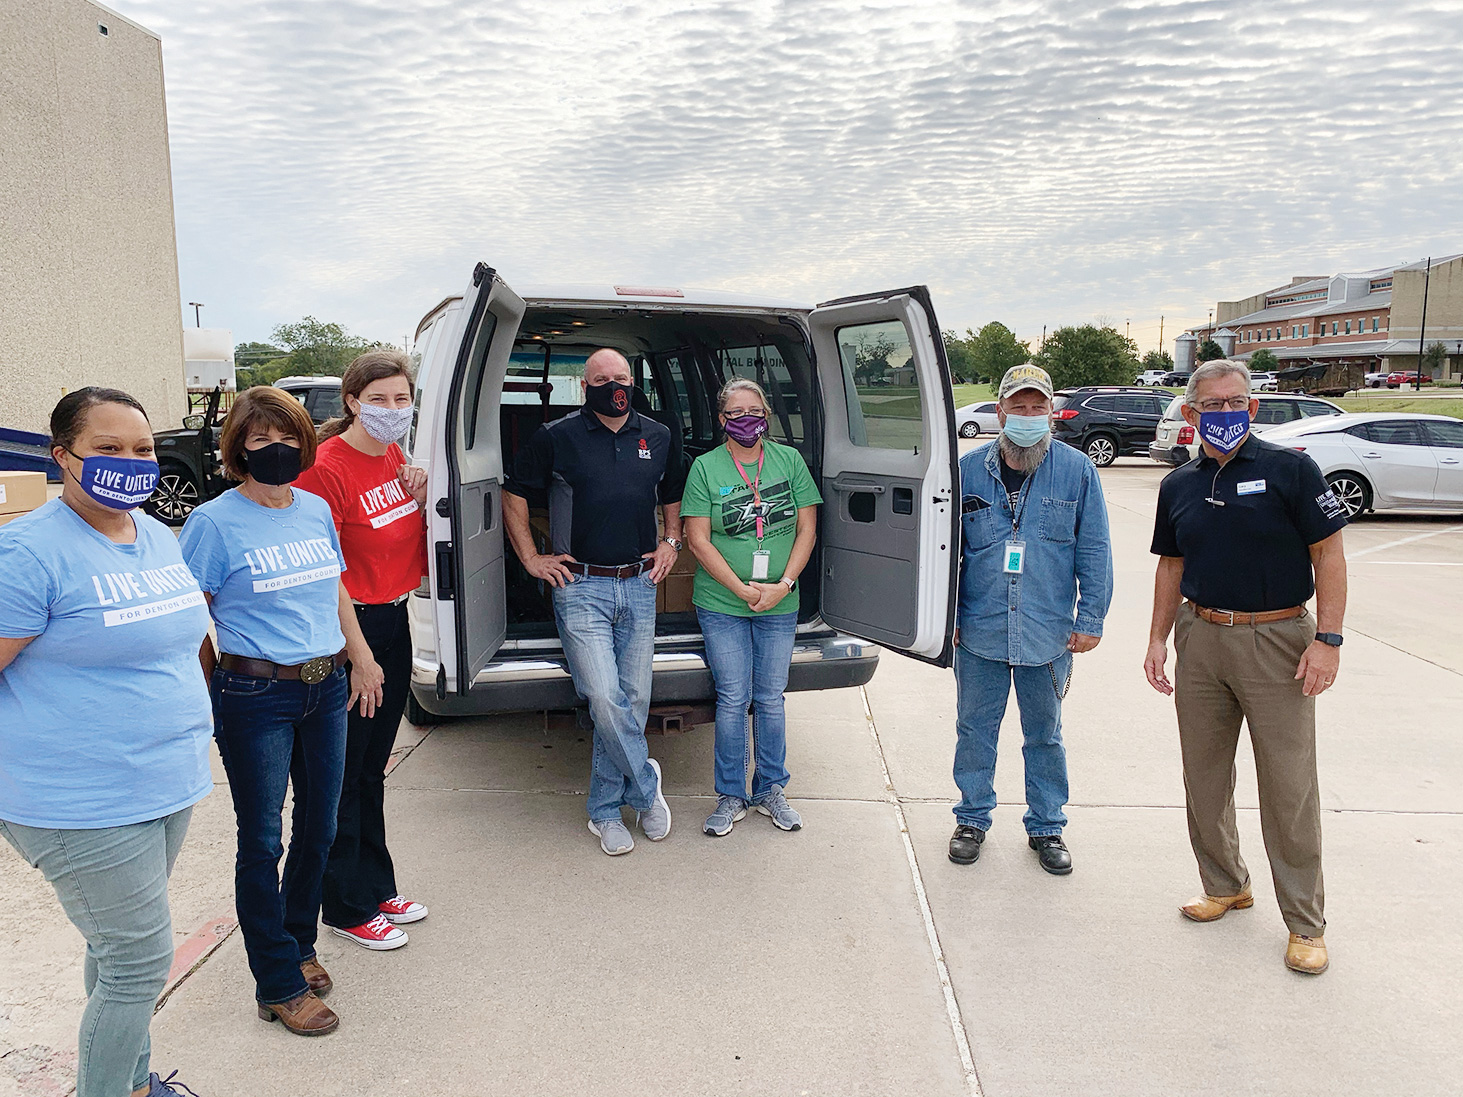 BPS Technology CEO Bravis Brown (center) and United Way of Denton County CEO Gary Henderson (right) and volunteers pose with Denton County Friends of the Family representatives, after loading their van with over 20 cases of hand sanitizer.